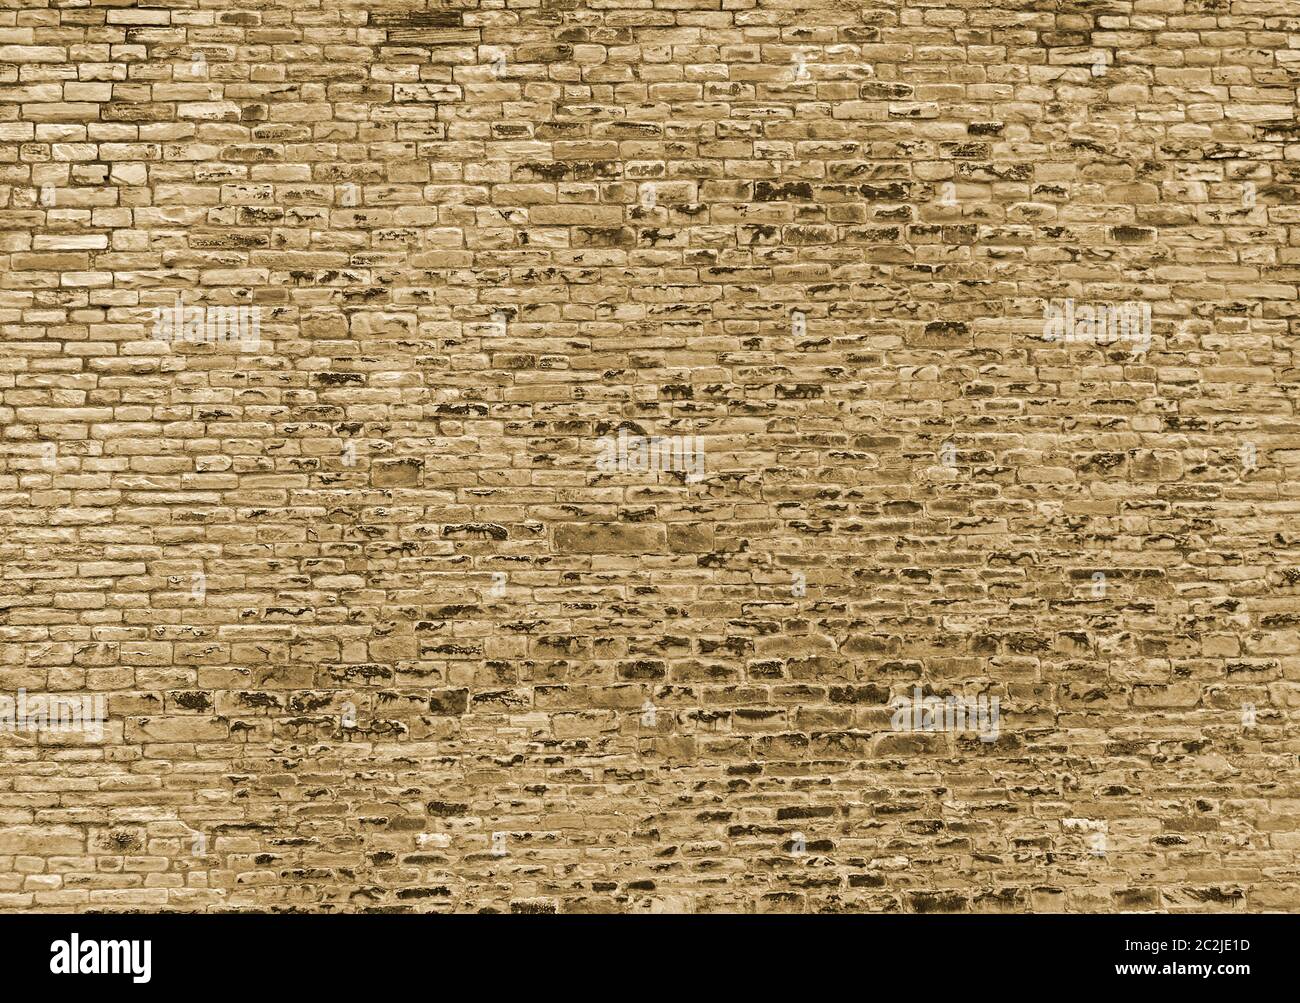 a sepia toned large rough textured brown wall made of old sandstone bricks Stock Photo